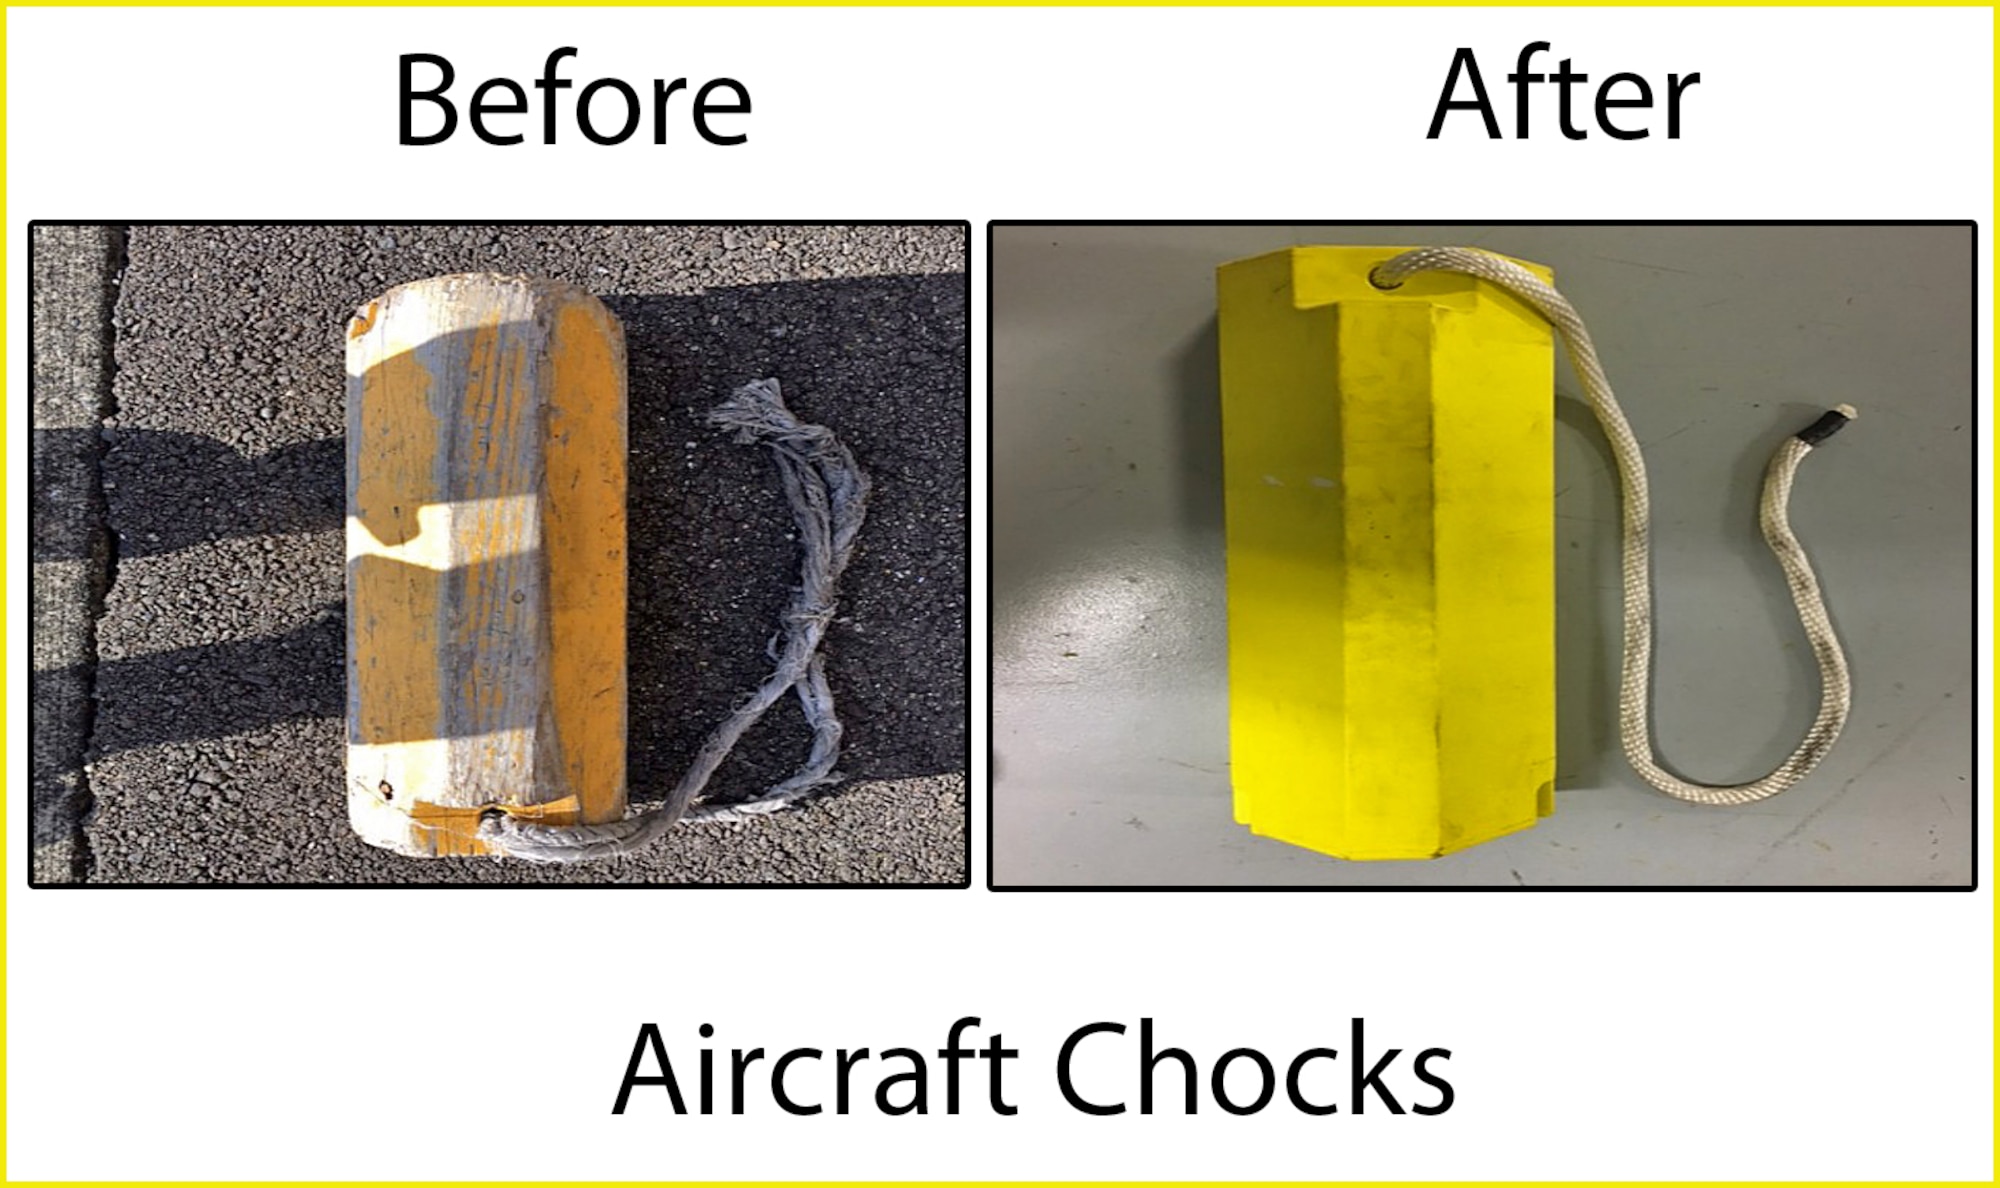 Before and after photos are taken of the 62nd Aircraft Maintenance Squadron aircraft chocks Sept. 26, 2016 at Joint Base Lewis-McChord, Wash. The plastic chocks (right) with nylon rope will replace the commonly used wooden chocks (left) and cotton cloth rope that degrade quickly from daily use and the Washington rain. The wooden chocks were replaced every four months, but replacing them with the plastic chocks will reduce the replacement rate with a potential ten year cost savings of $154,600. (U.S. Air Force graphic/Senior Airman Divine Cox)